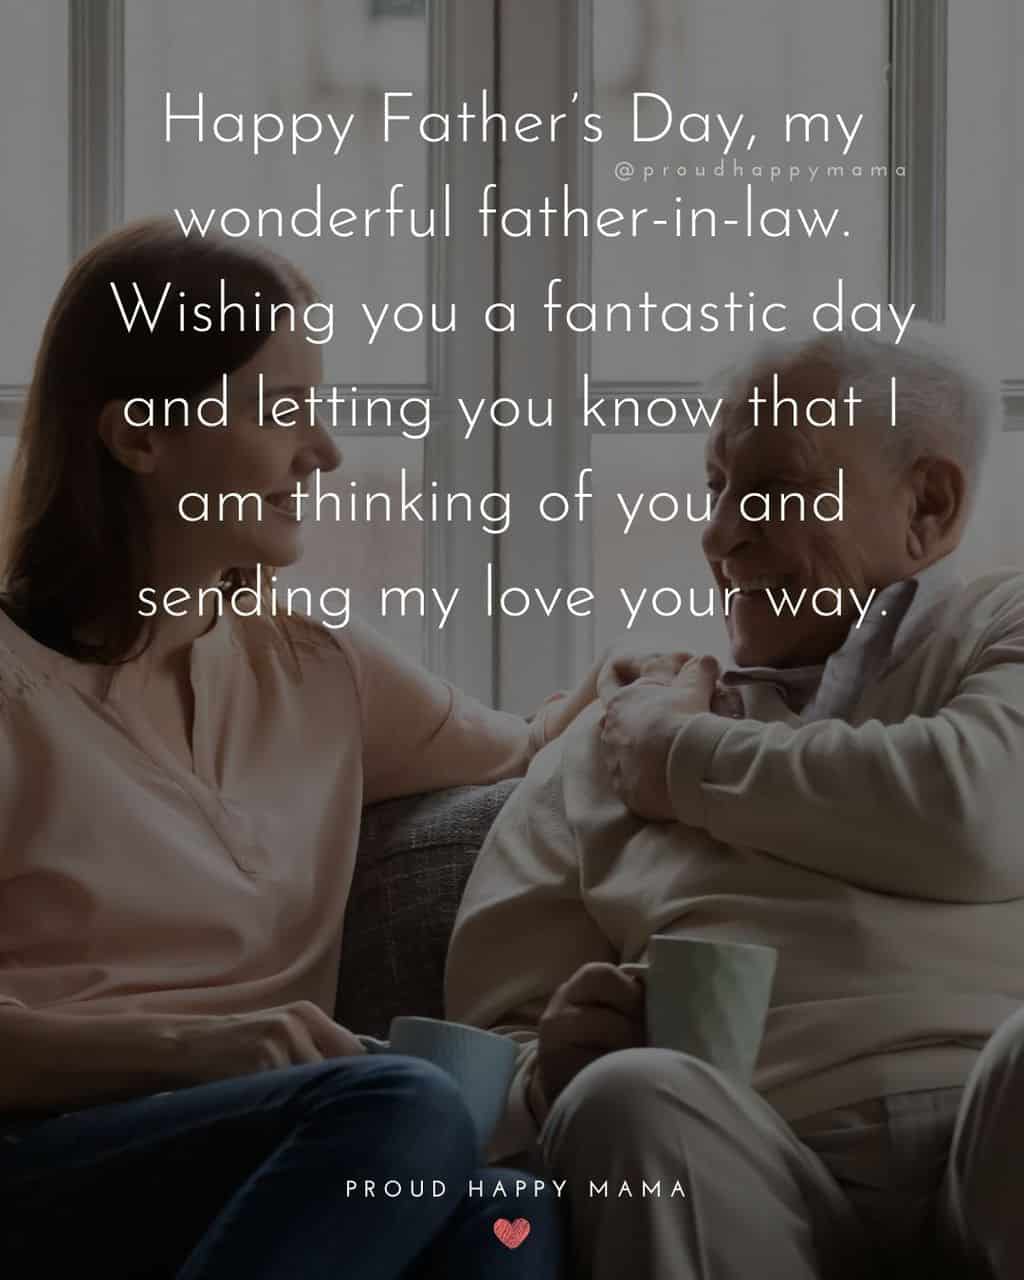 Happy Fathers Day Quotes For Father In Law - Happy Father’s Day, my wonderful father in law. Wishing you a fantastic day and